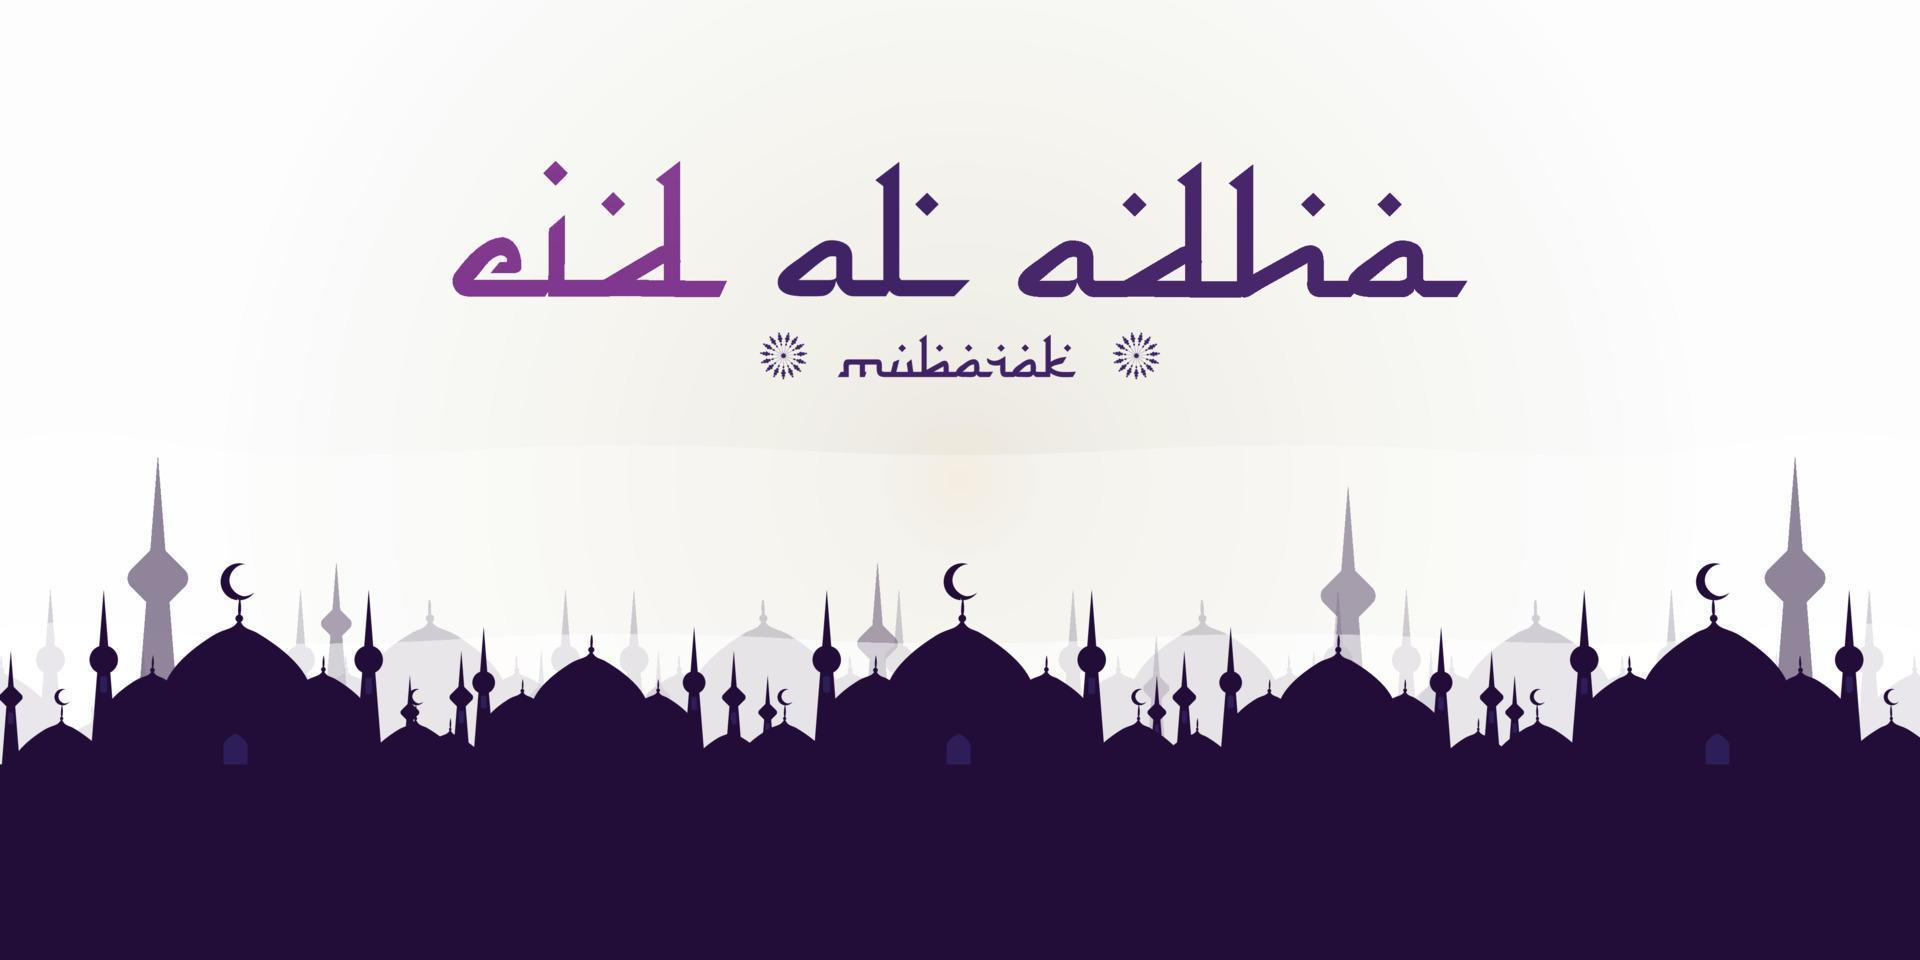 Eid al-Adha with mosque. suitable for banners, posters, brochures, sales brochure templates 23 vector